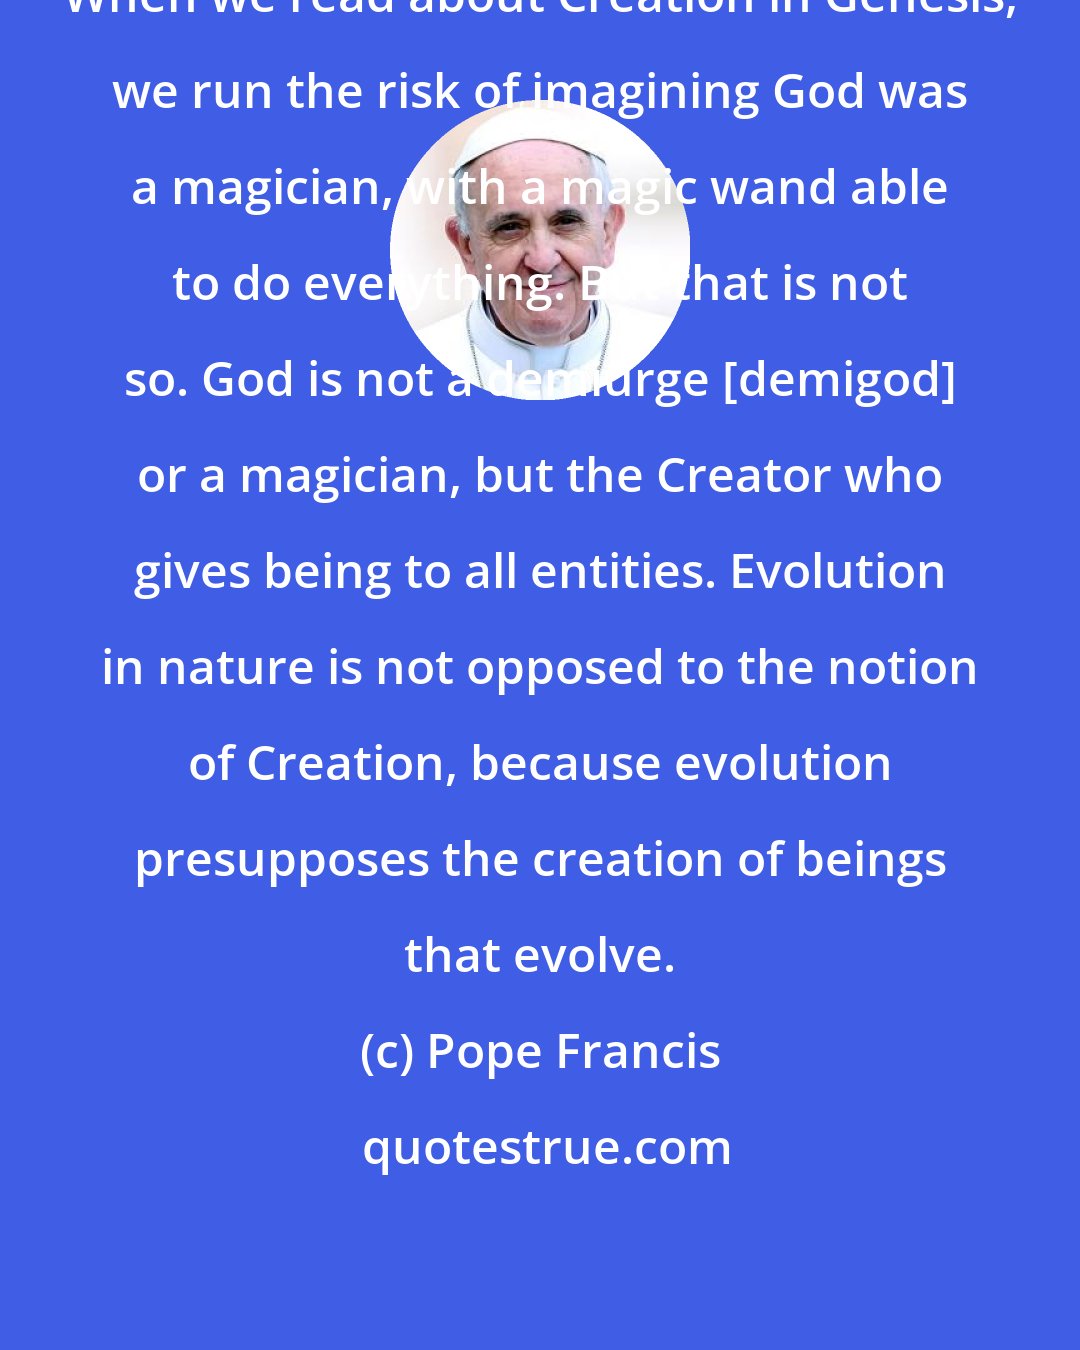 Pope Francis: When we read about Creation in Genesis, we run the risk of imagining God was a magician, with a magic wand able to do everything. But that is not so. God is not a demiurge [demigod] or a magician, but the Creator who gives being to all entities. Evolution in nature is not opposed to the notion of Creation, because evolution presupposes the creation of beings that evolve.